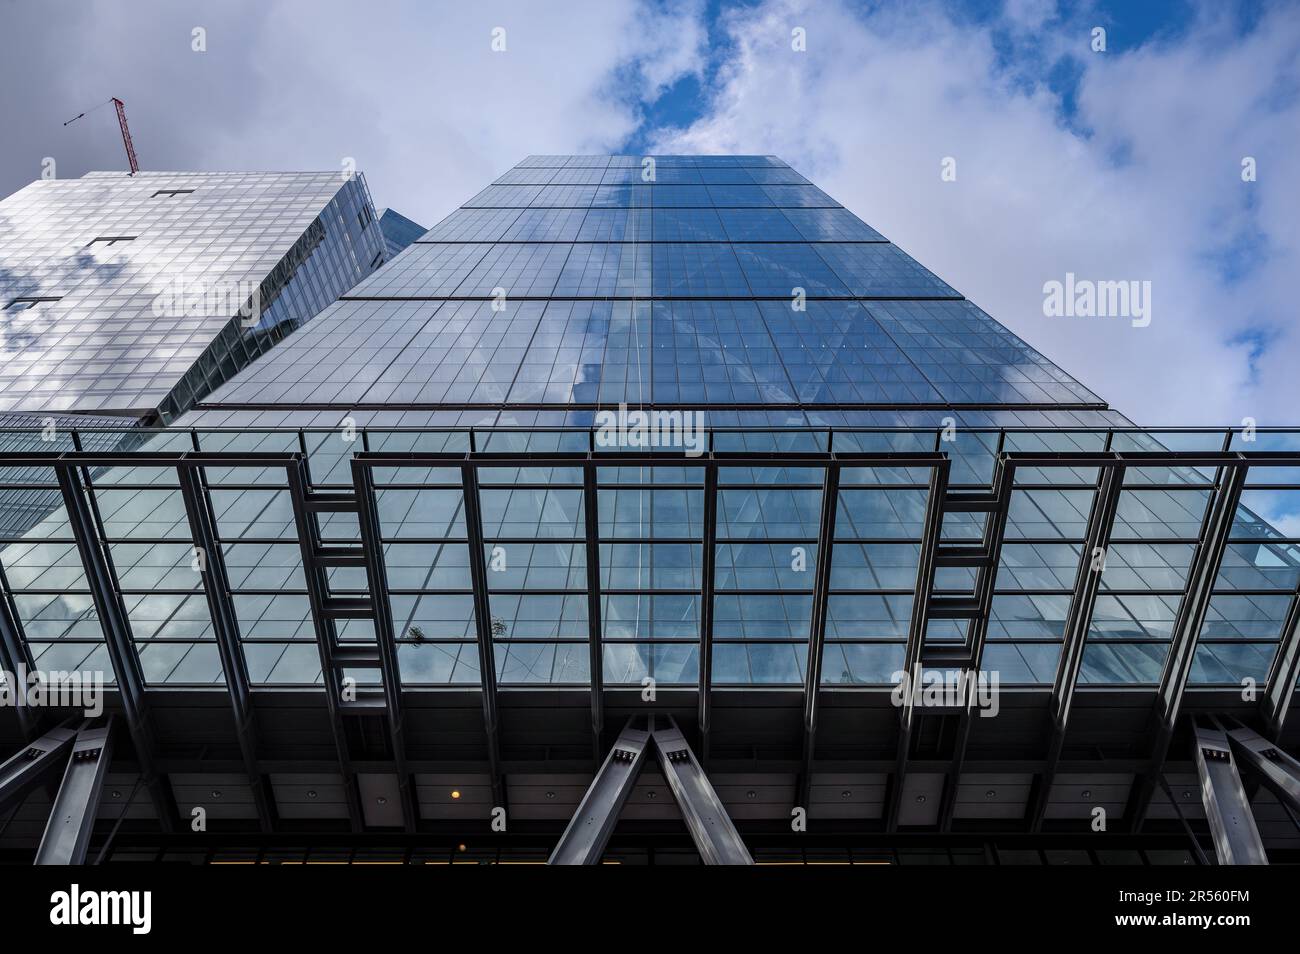 London, UK: The Cheesegrater or Leadenhall Building at 122 Leadenhall Street. A modern London skyscraper seen from the entrance on Leadenhall Street. Stock Photo